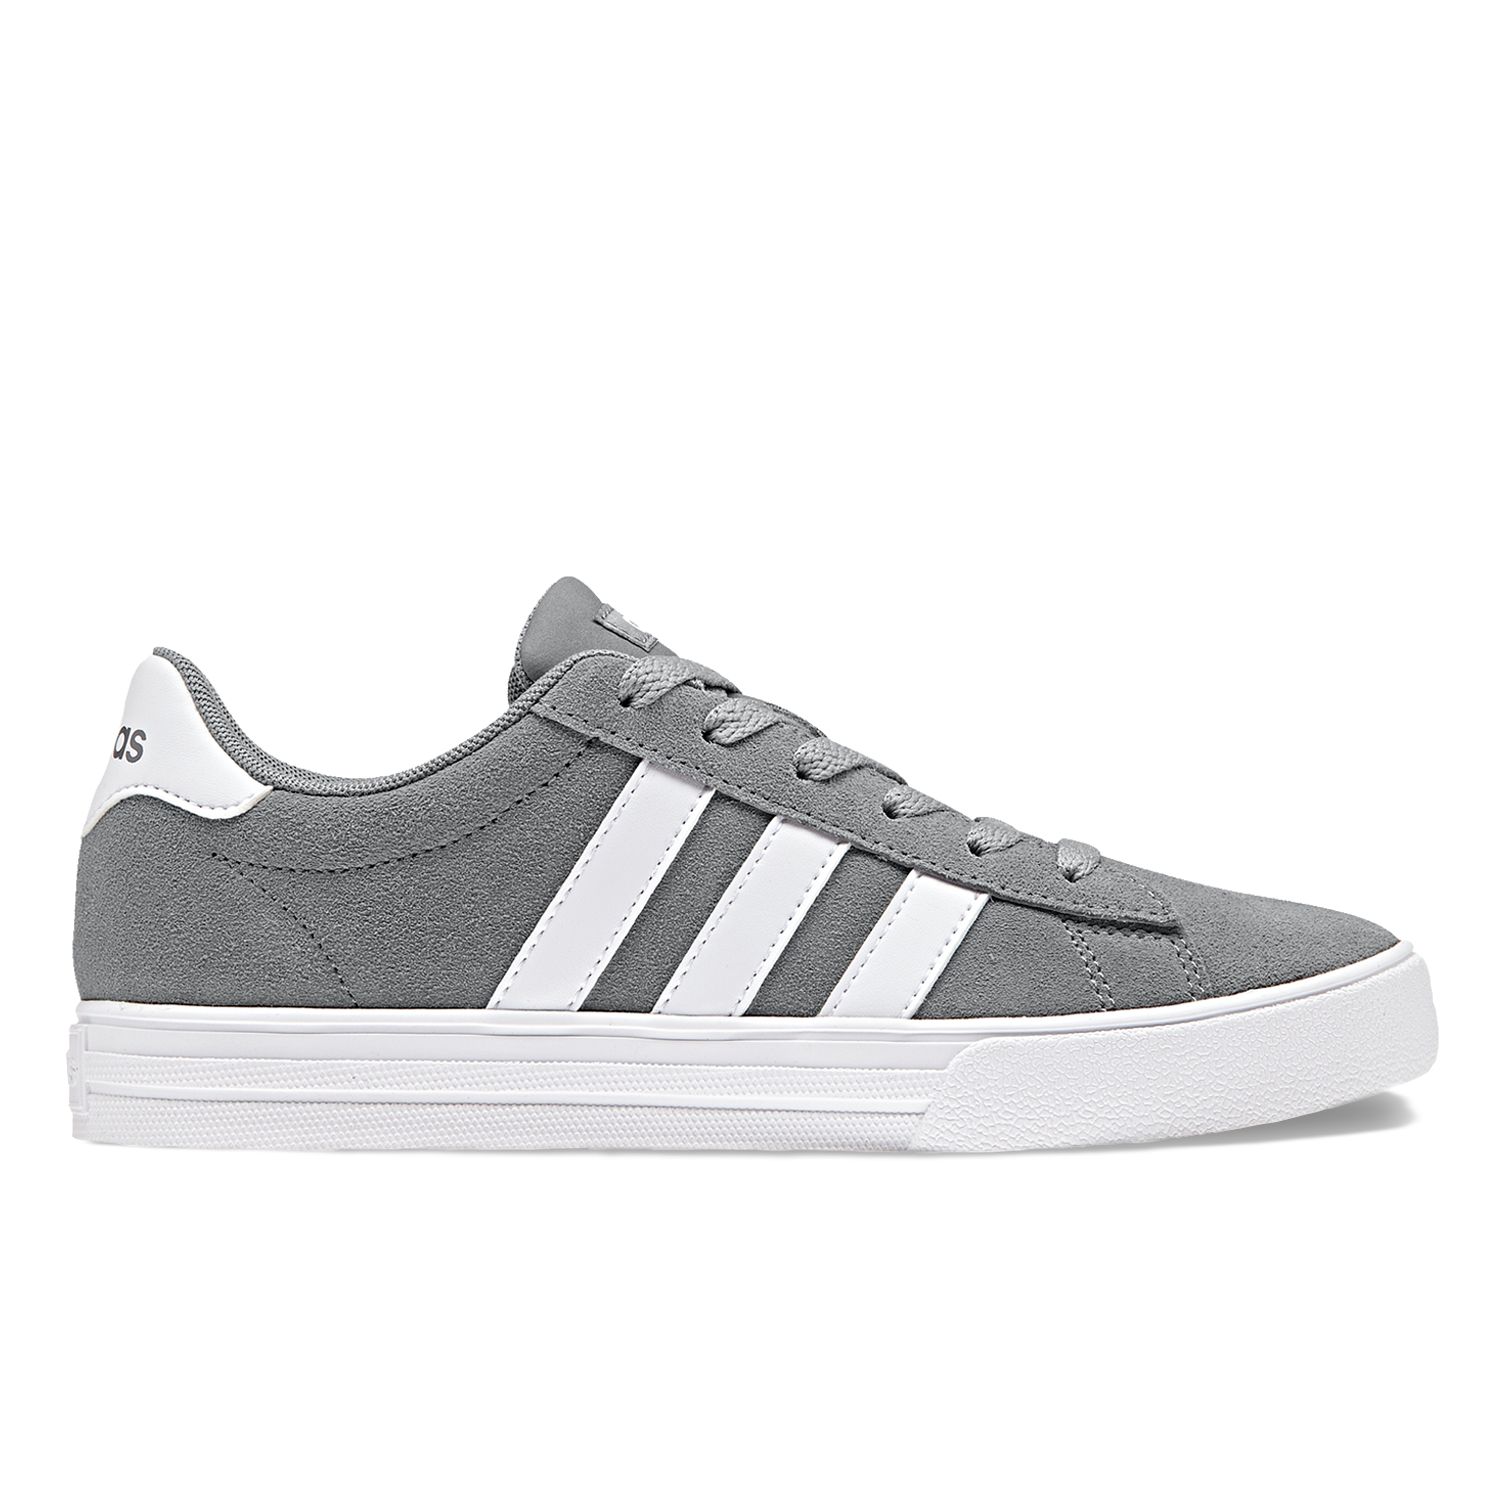 adidas NEO Daily 2.0 Kids' Sneakers